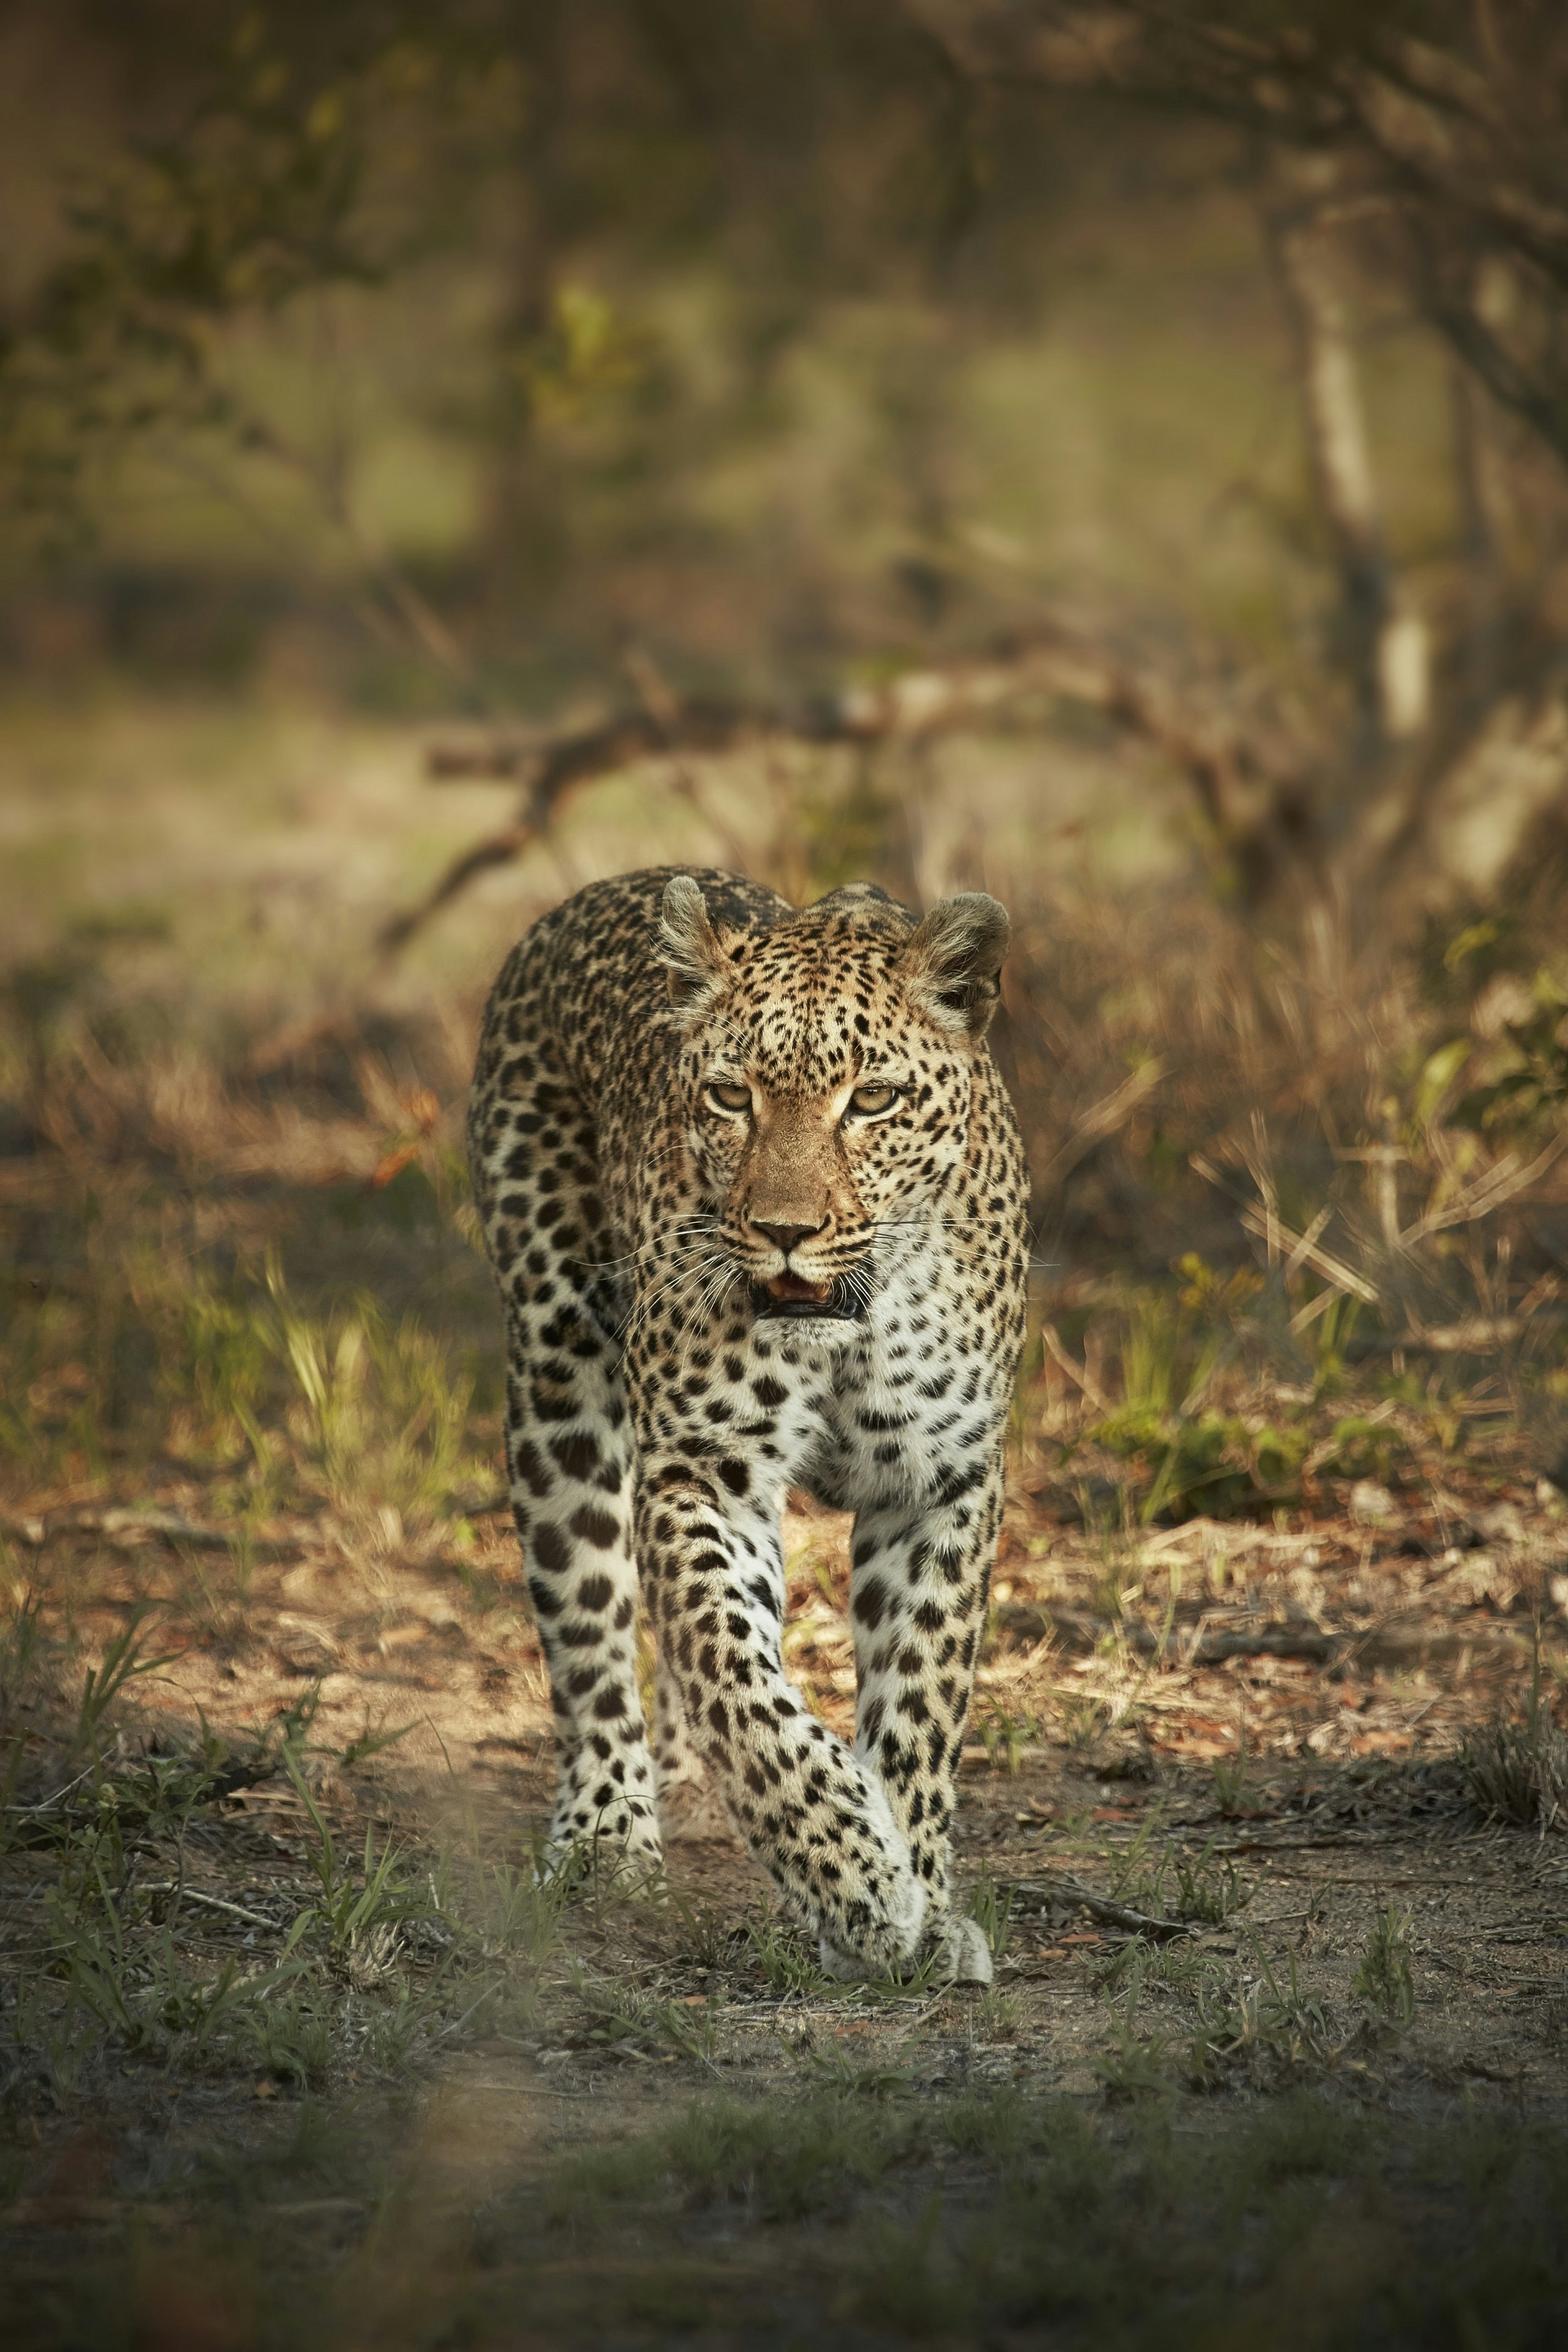 A leopard stalks towards the camera through the low undergrowth.